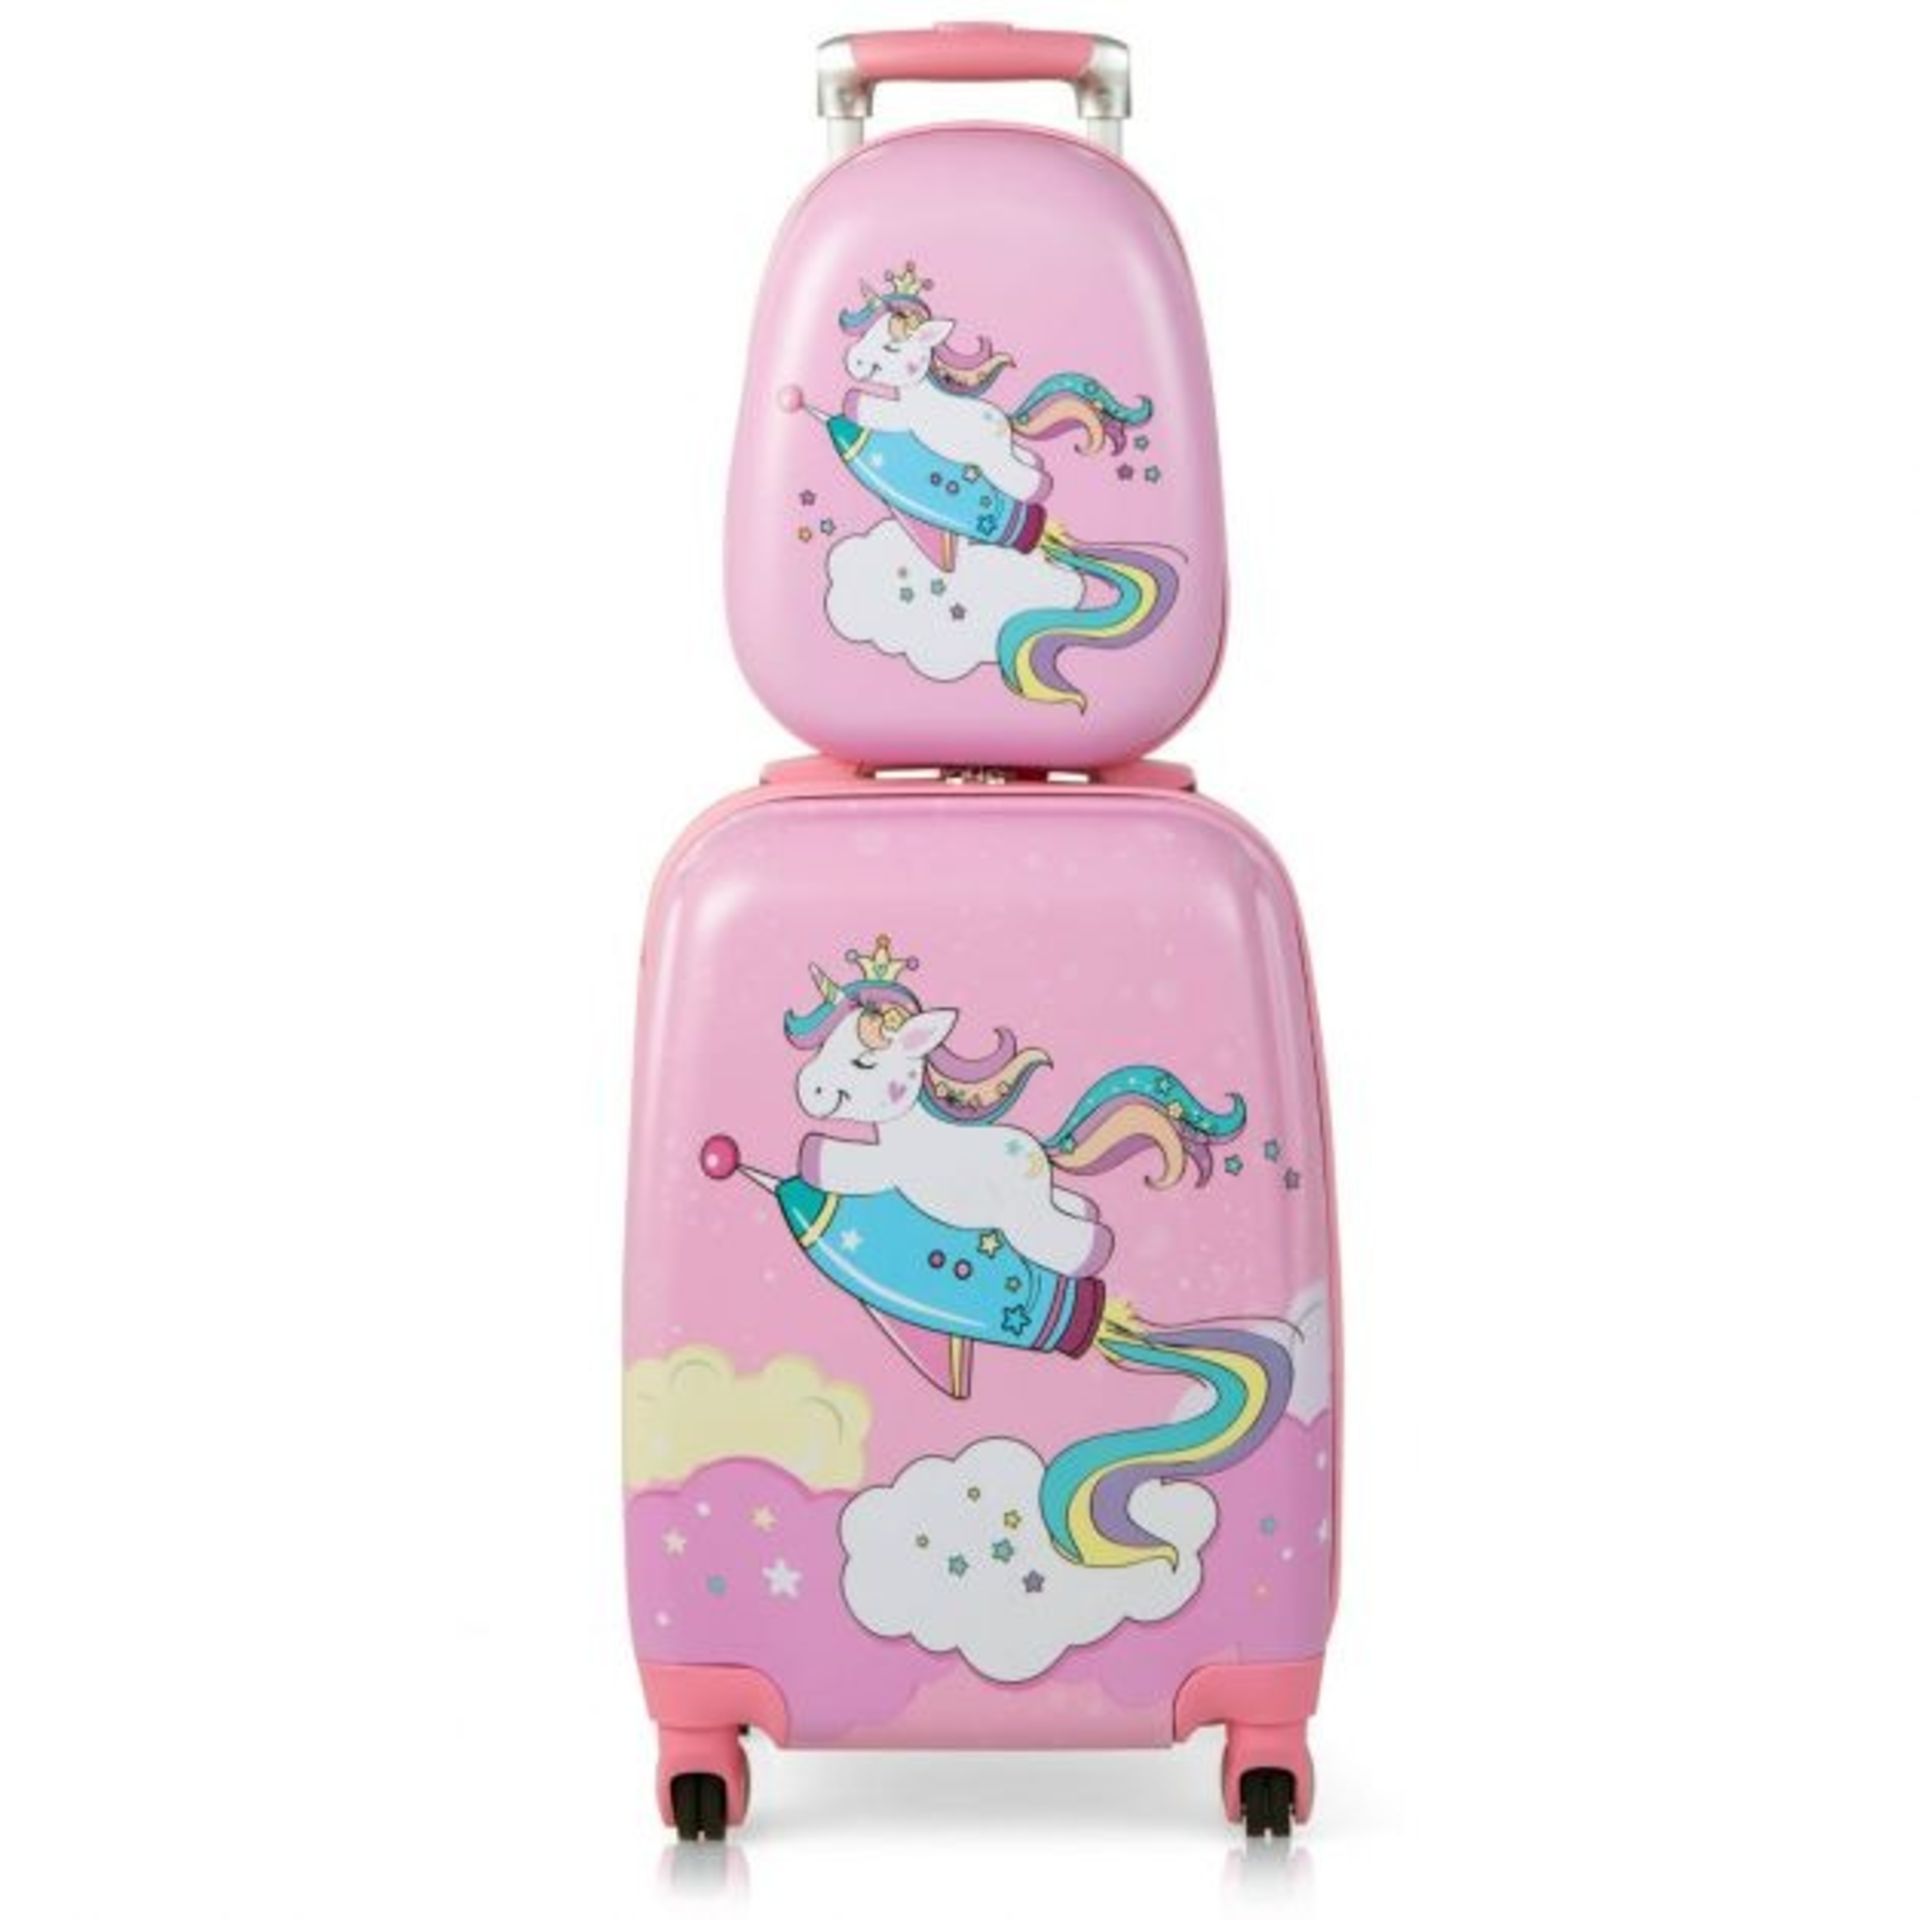 2 Pieces Kids Luggage Set with Spinner Wheels and Unicorn Graphic - ER53